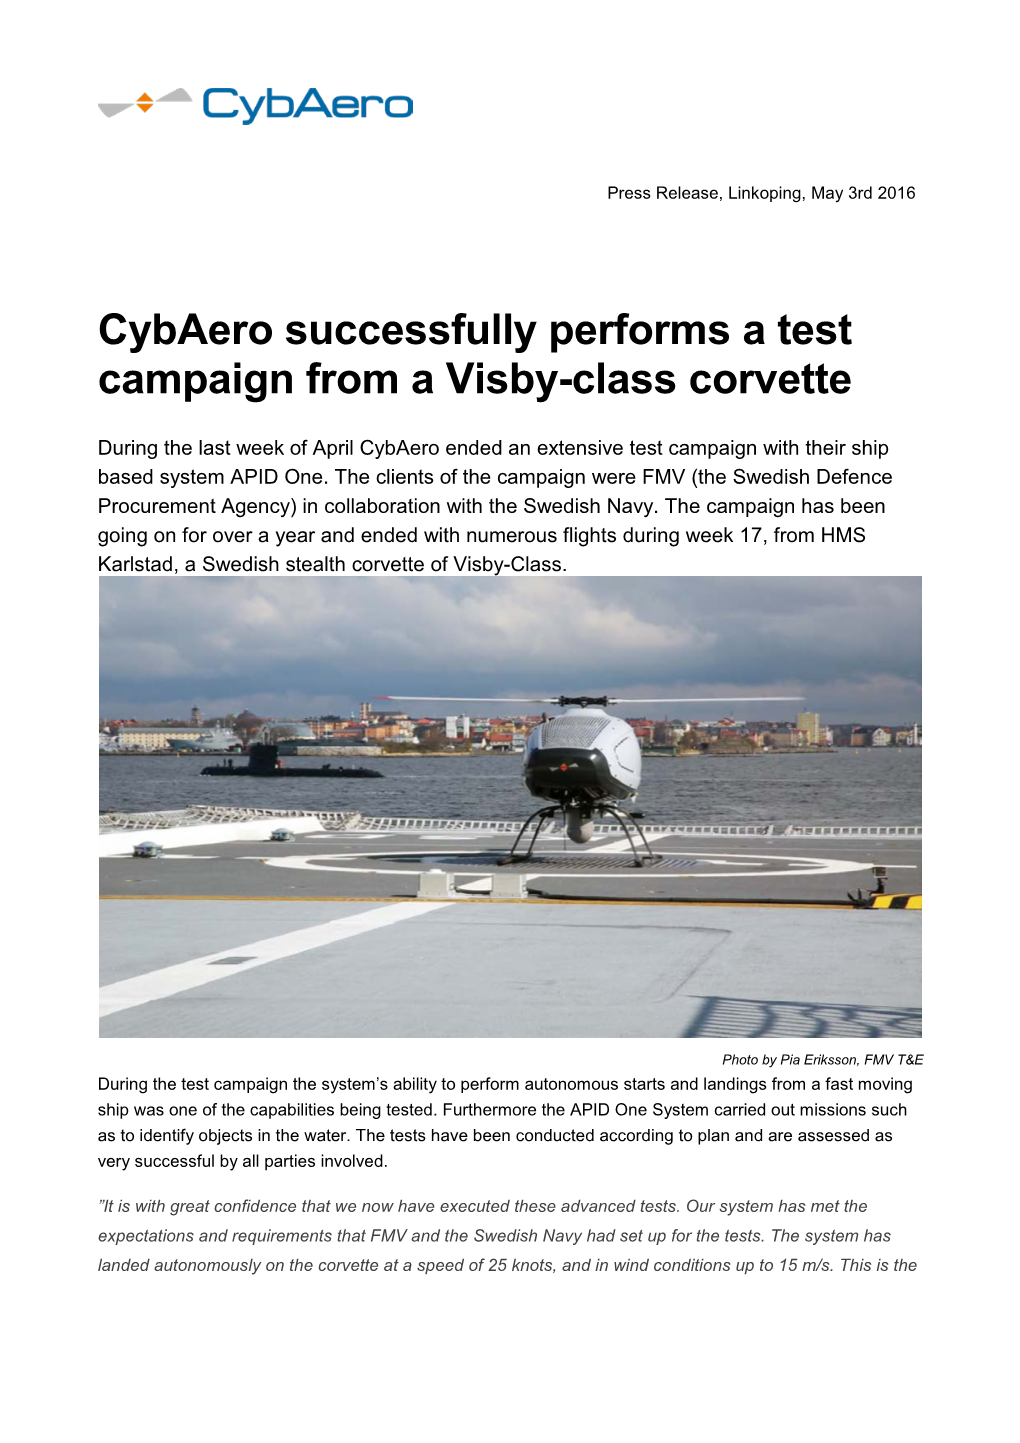 Cybaero Successfully Performs a Test Campaign from a Visby-Class Corvette